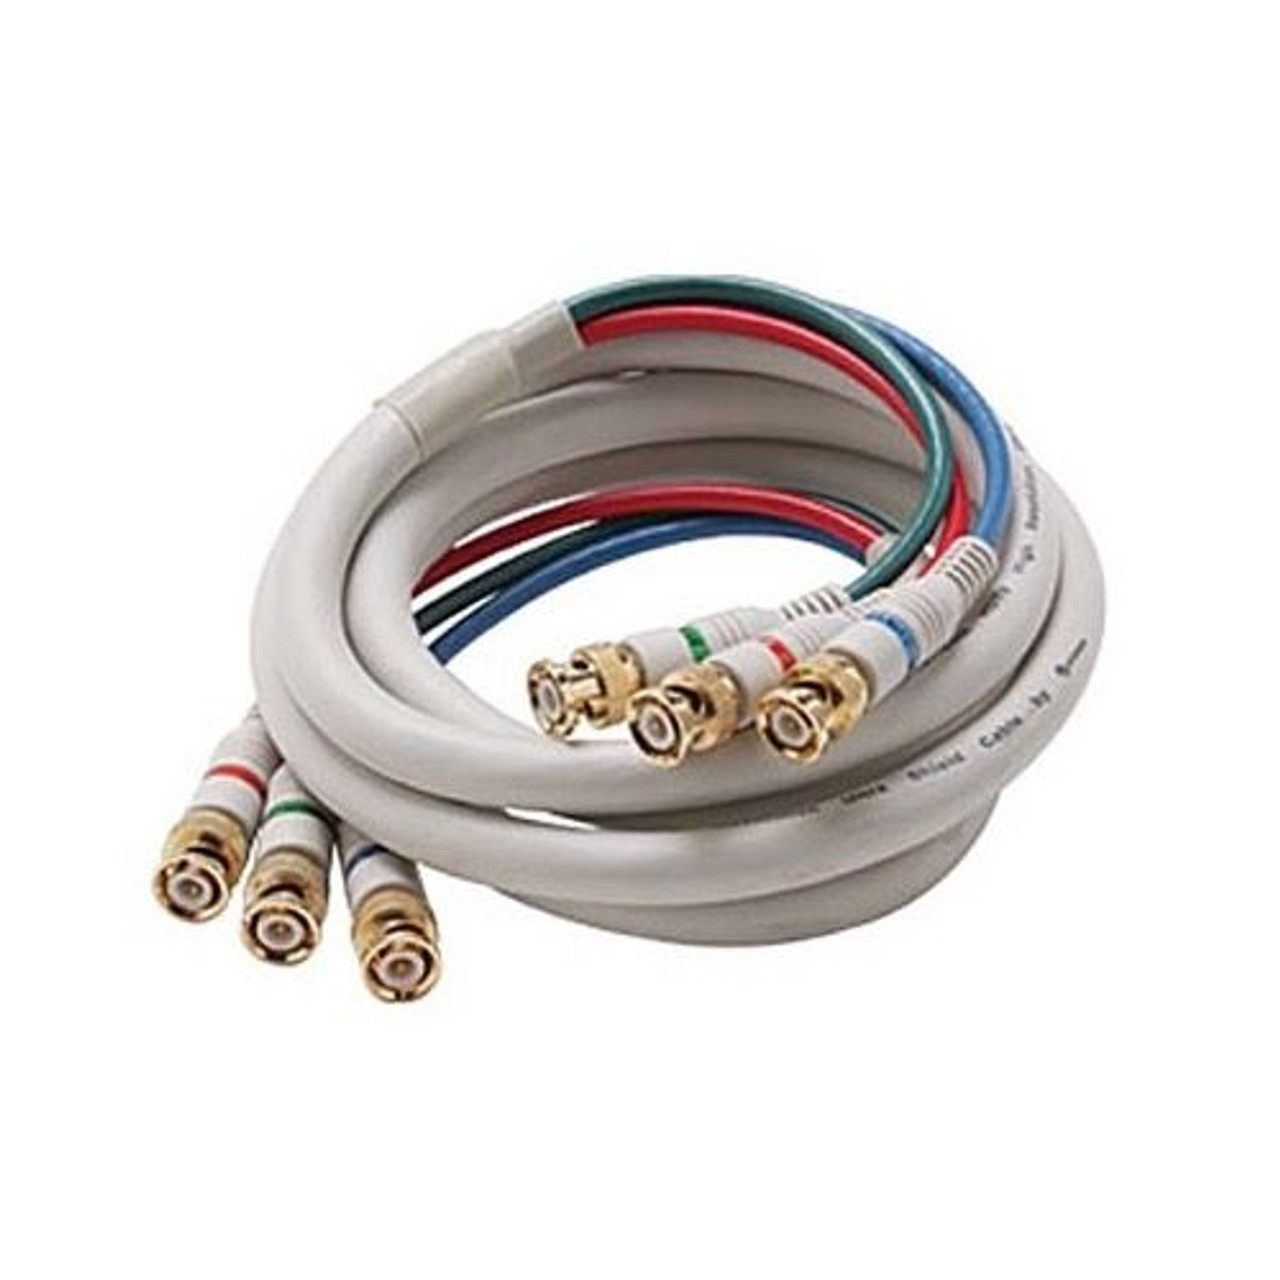 Steren 254-406IV 6' FT BNC Cable 3 Male Ends Each End Double Shielded R/G/B Component HDTV Python Video Cable Ivory RGB 75 Ohm Audio Video Gold Y/Pr/Pb Pro Grade Color Coded Double High Density Signal Jumper, Part # 254406-IV